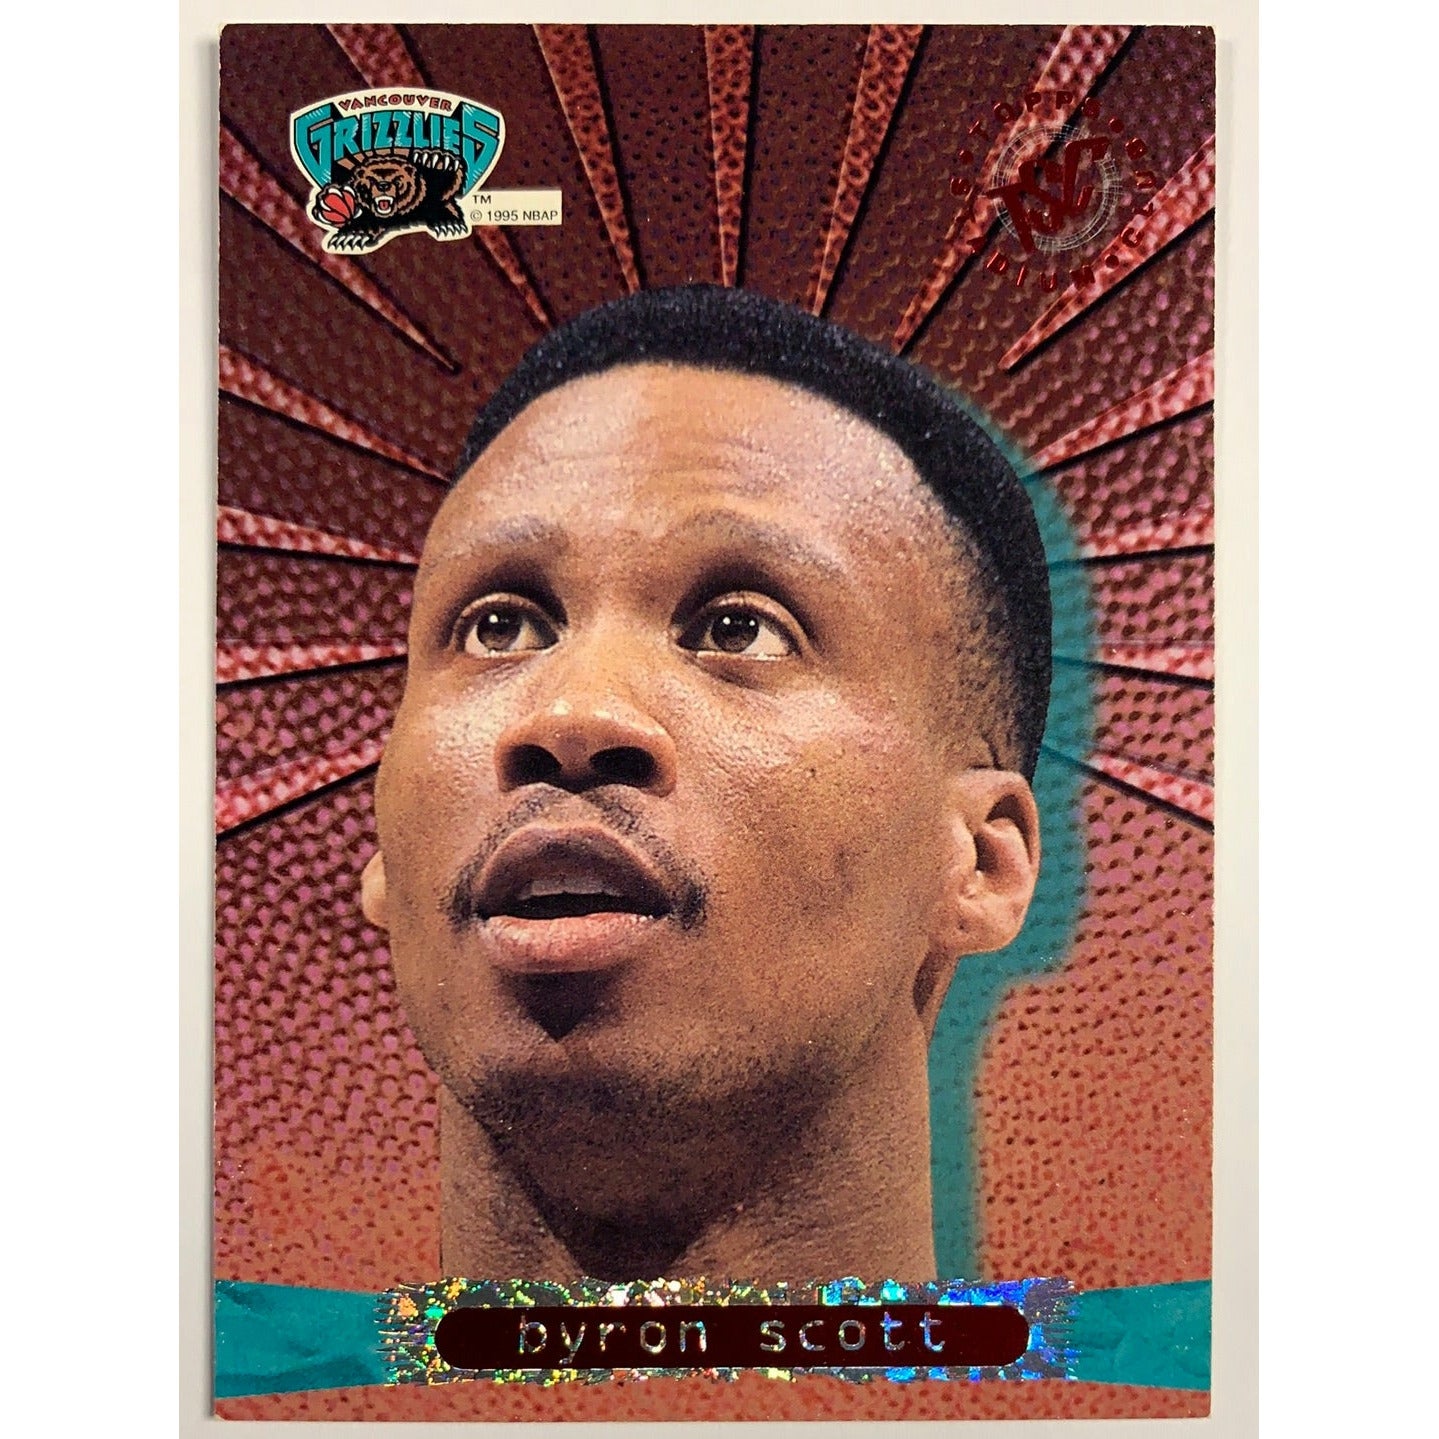 1995 Topps Stadium Club Byron Scott Grizzlies Inaugural Year-Local Legends Cards & Collectibles